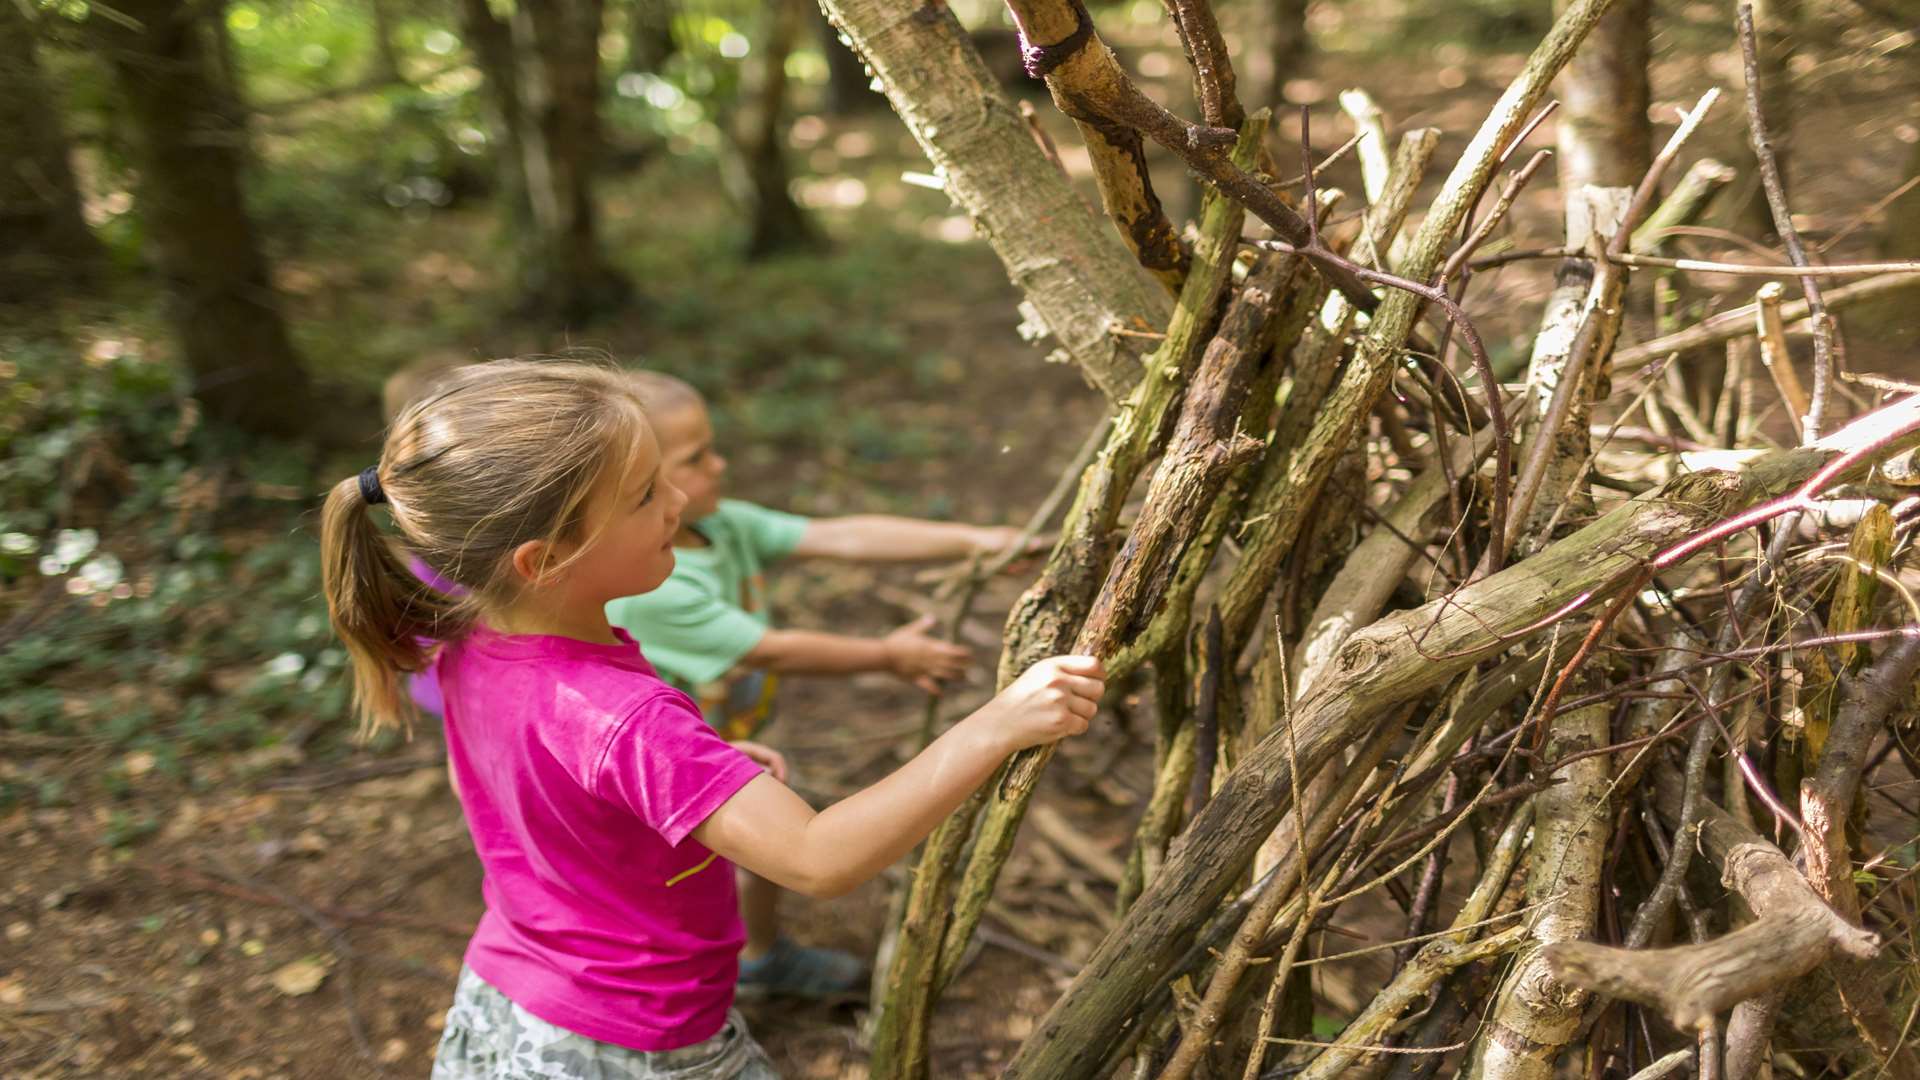 Enjoy the natural play areas at National Trust properties